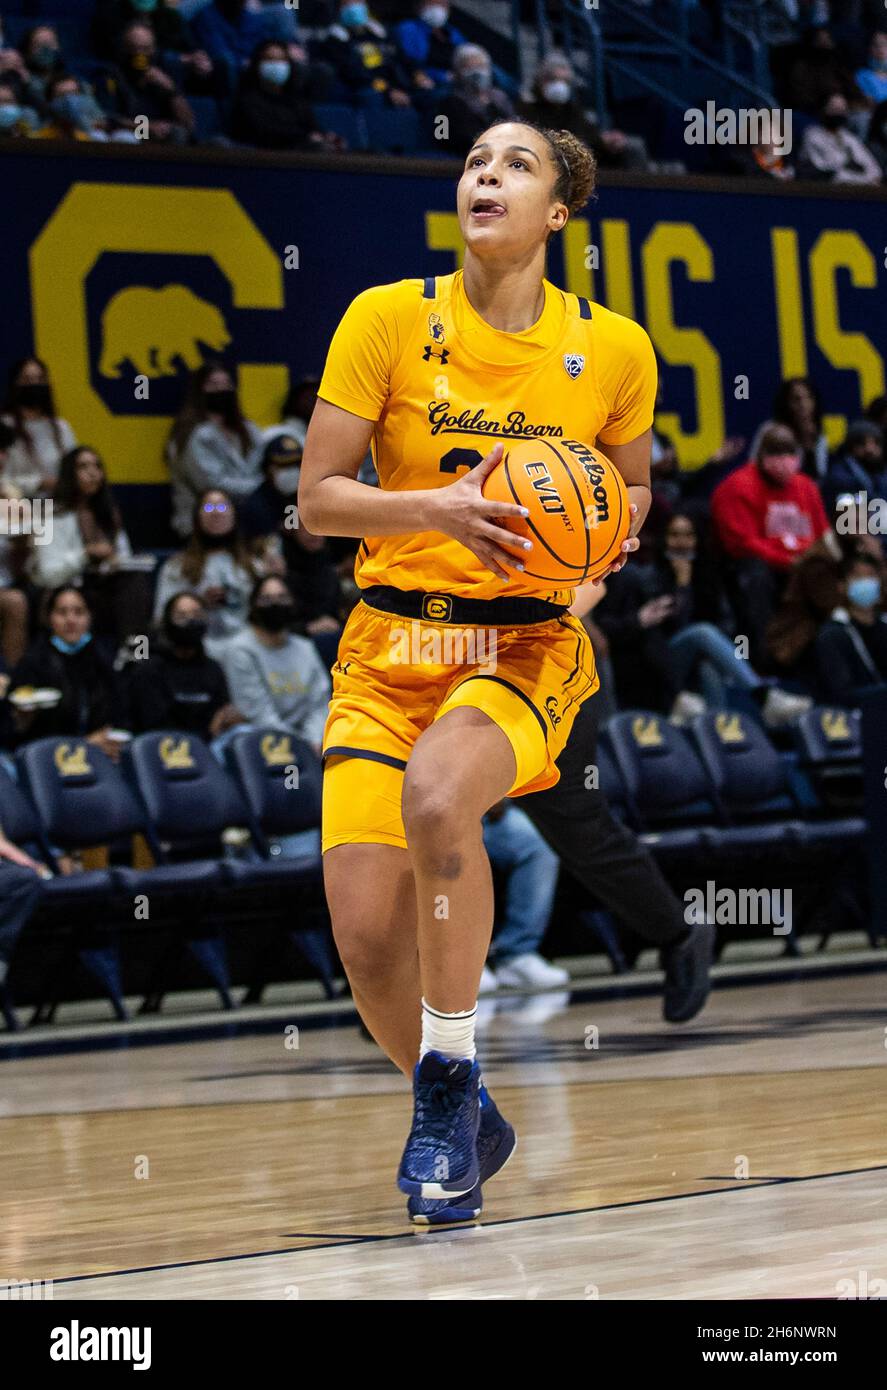 Berkeley, CA U.S. 16th Nov, 2021. A. California forward Evelien Lutje  Schipholt (24) goes to the basket during the NCAA Women's Basketball game  between Utah State Aggies and the California Golden Bears.